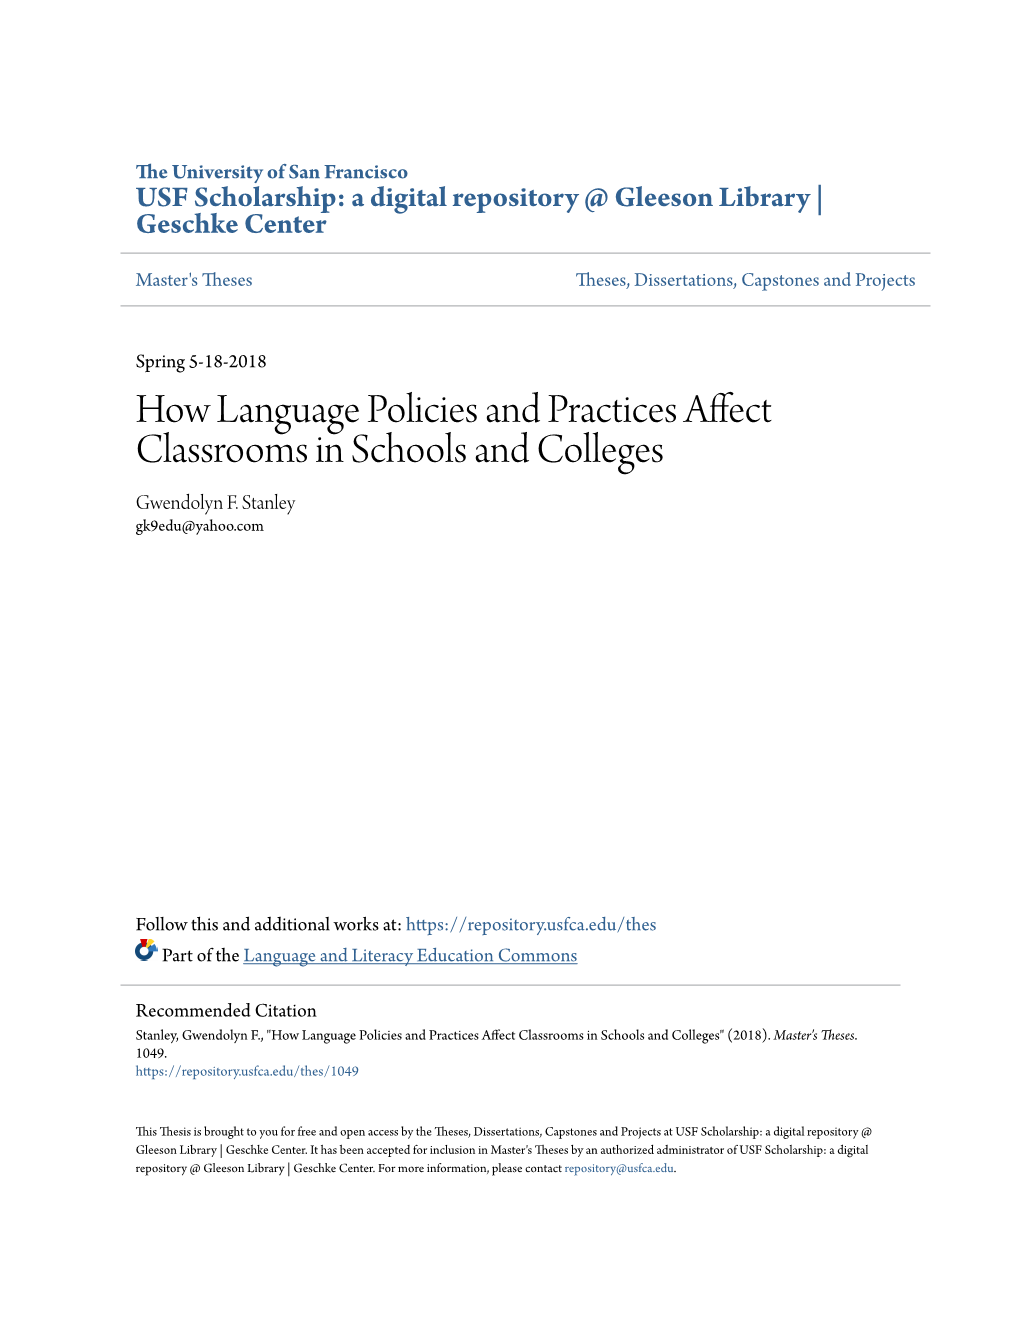 How Language Policies and Practices Affect Classrooms in Schools and Colleges Gwendolyn F